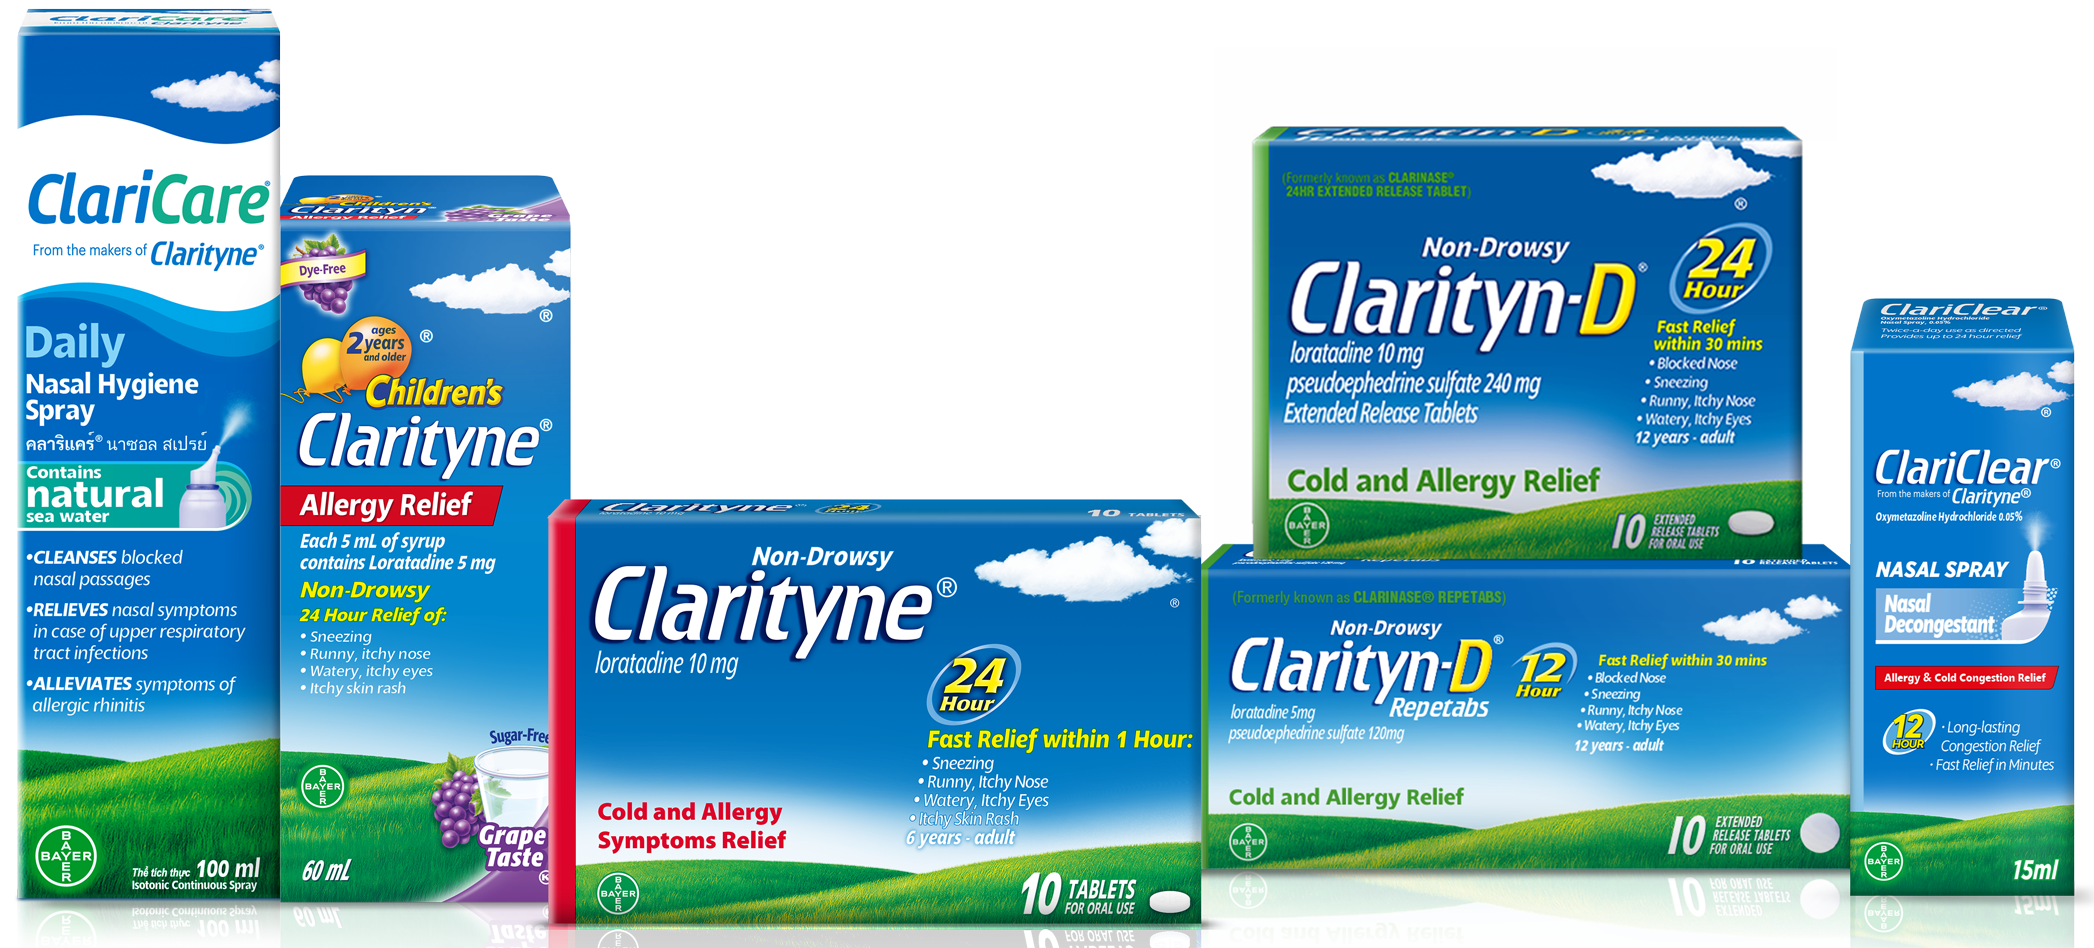 Clarityne products